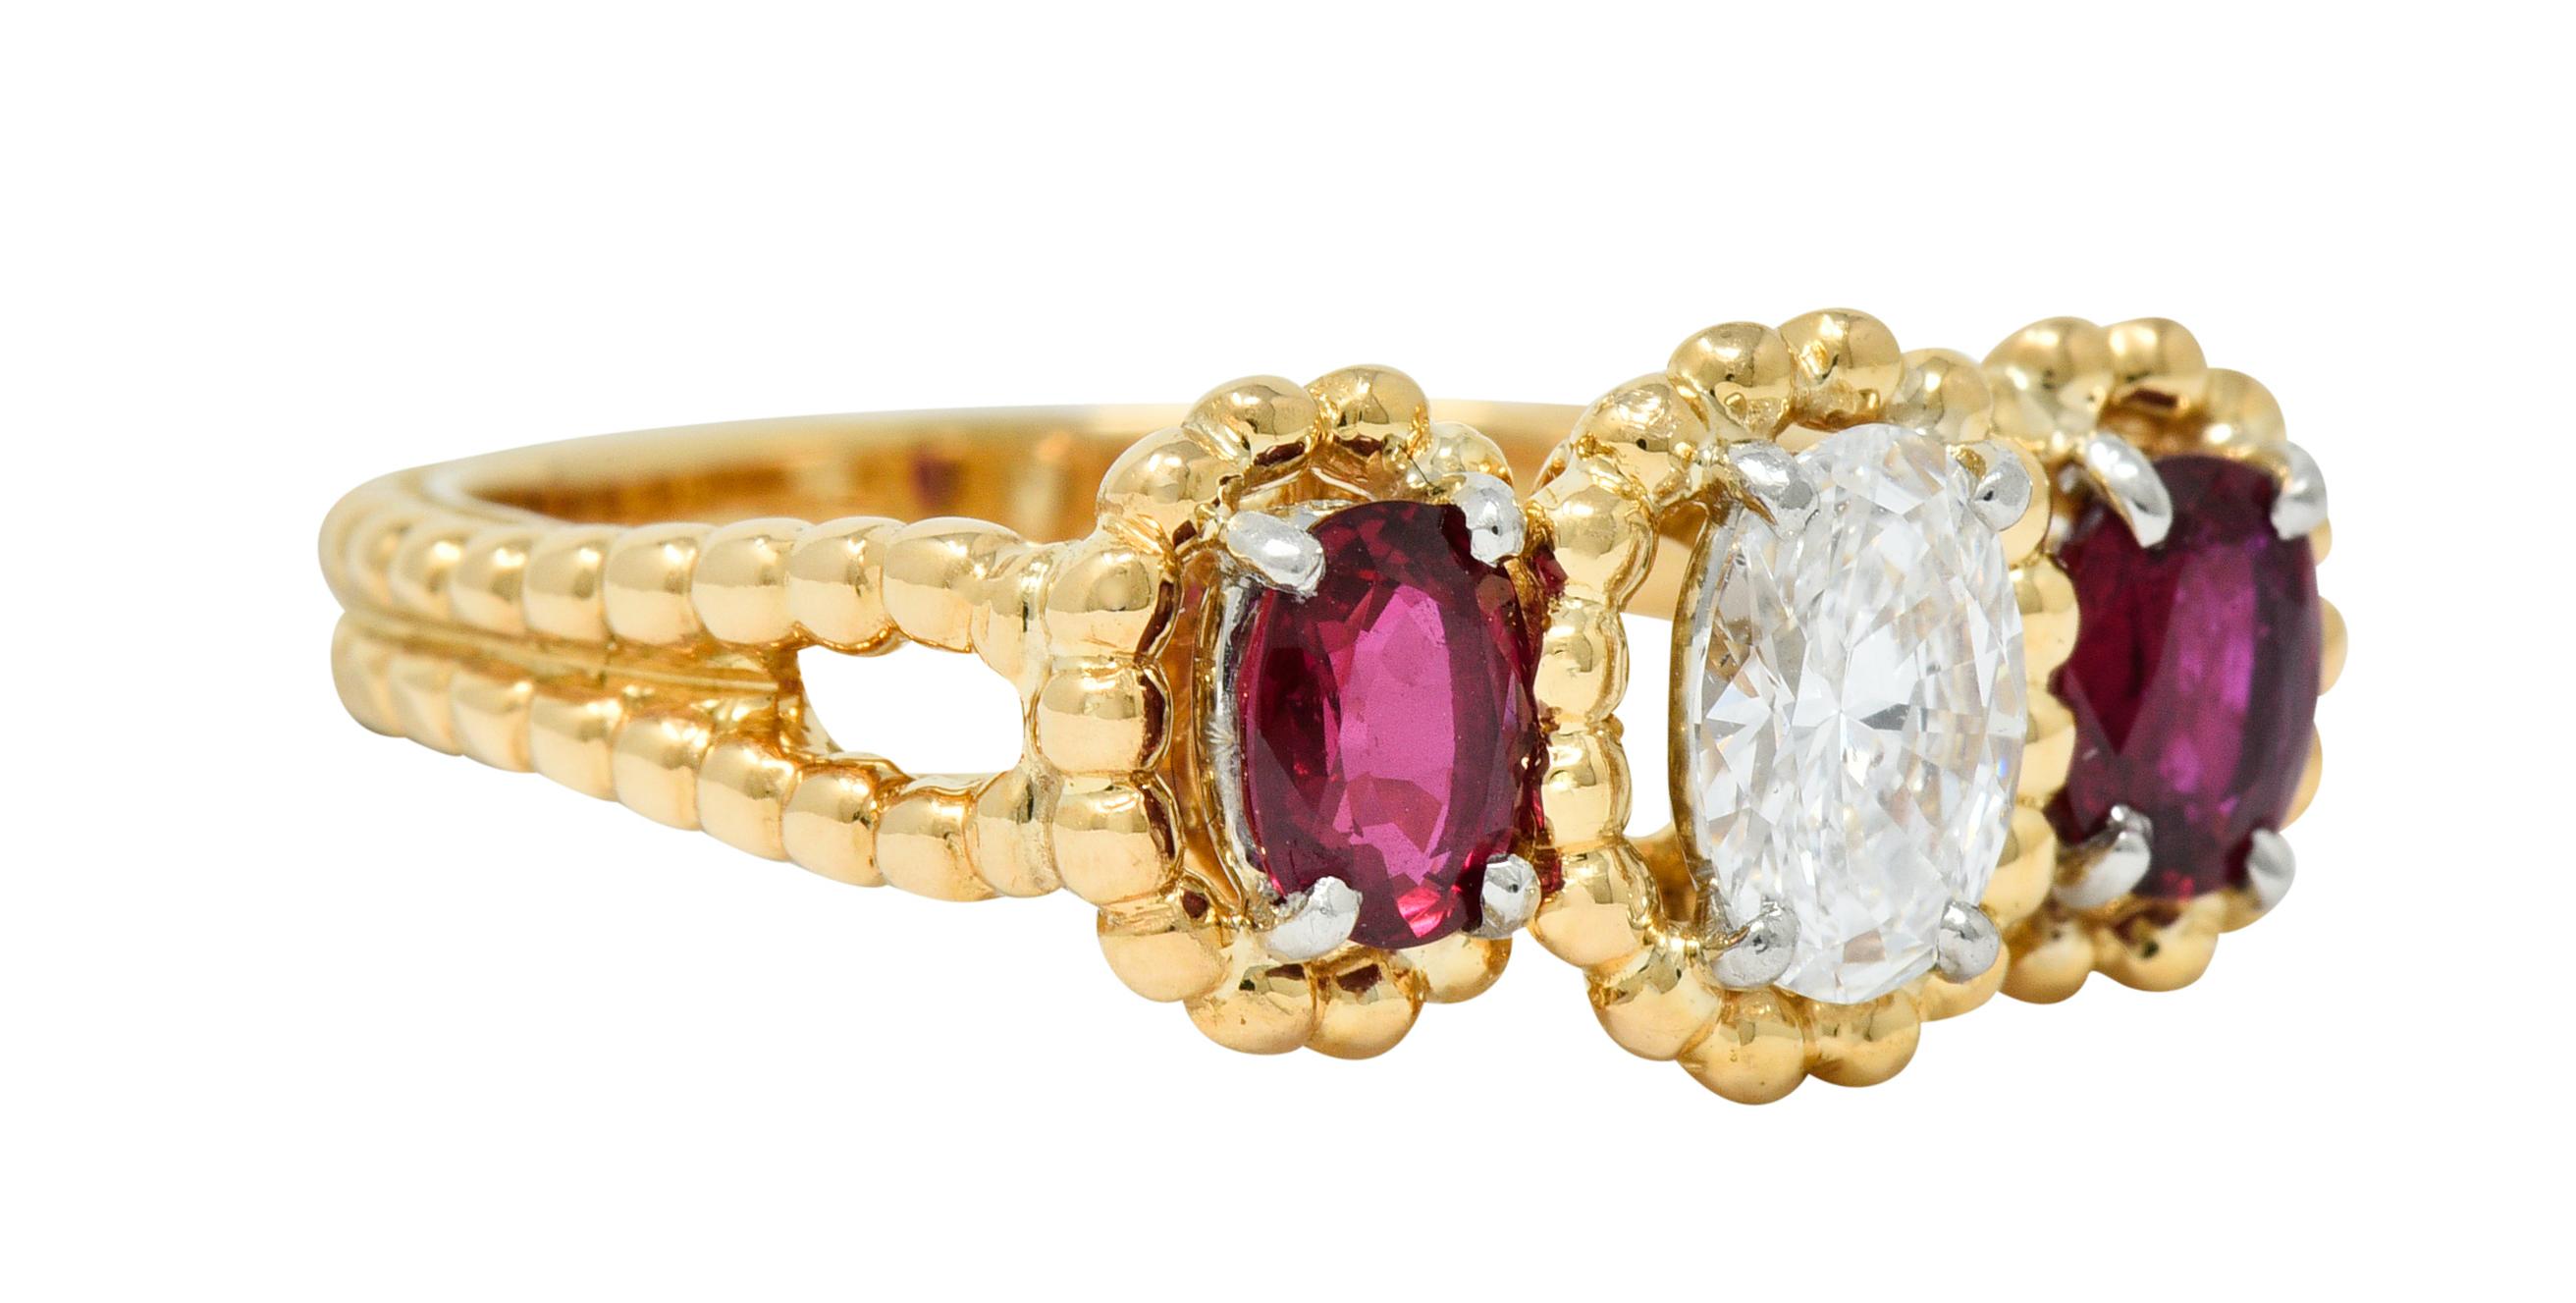 Three stone ring design is comprised of a yellow gold twisted rope motif

Centering an oval cut diamond weighing approximately 0.55 carat; F color with VS clarity

Flanked by two oval cut rubies, bright red, weighing in total approximately 0.85